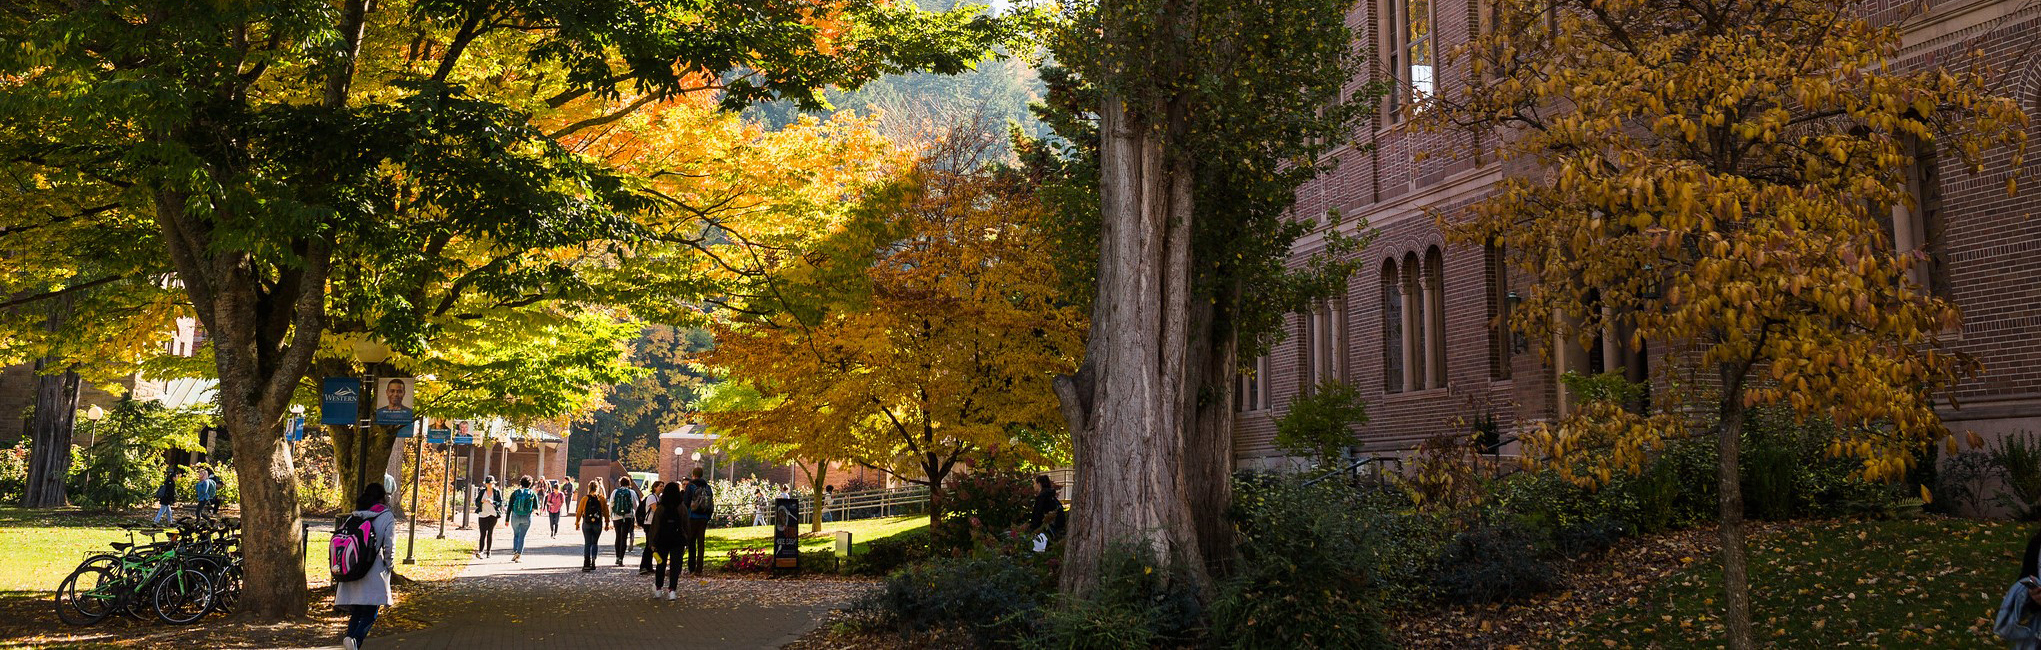 Students walk among fallen leaves near Wilson Library on a sunny afternoon